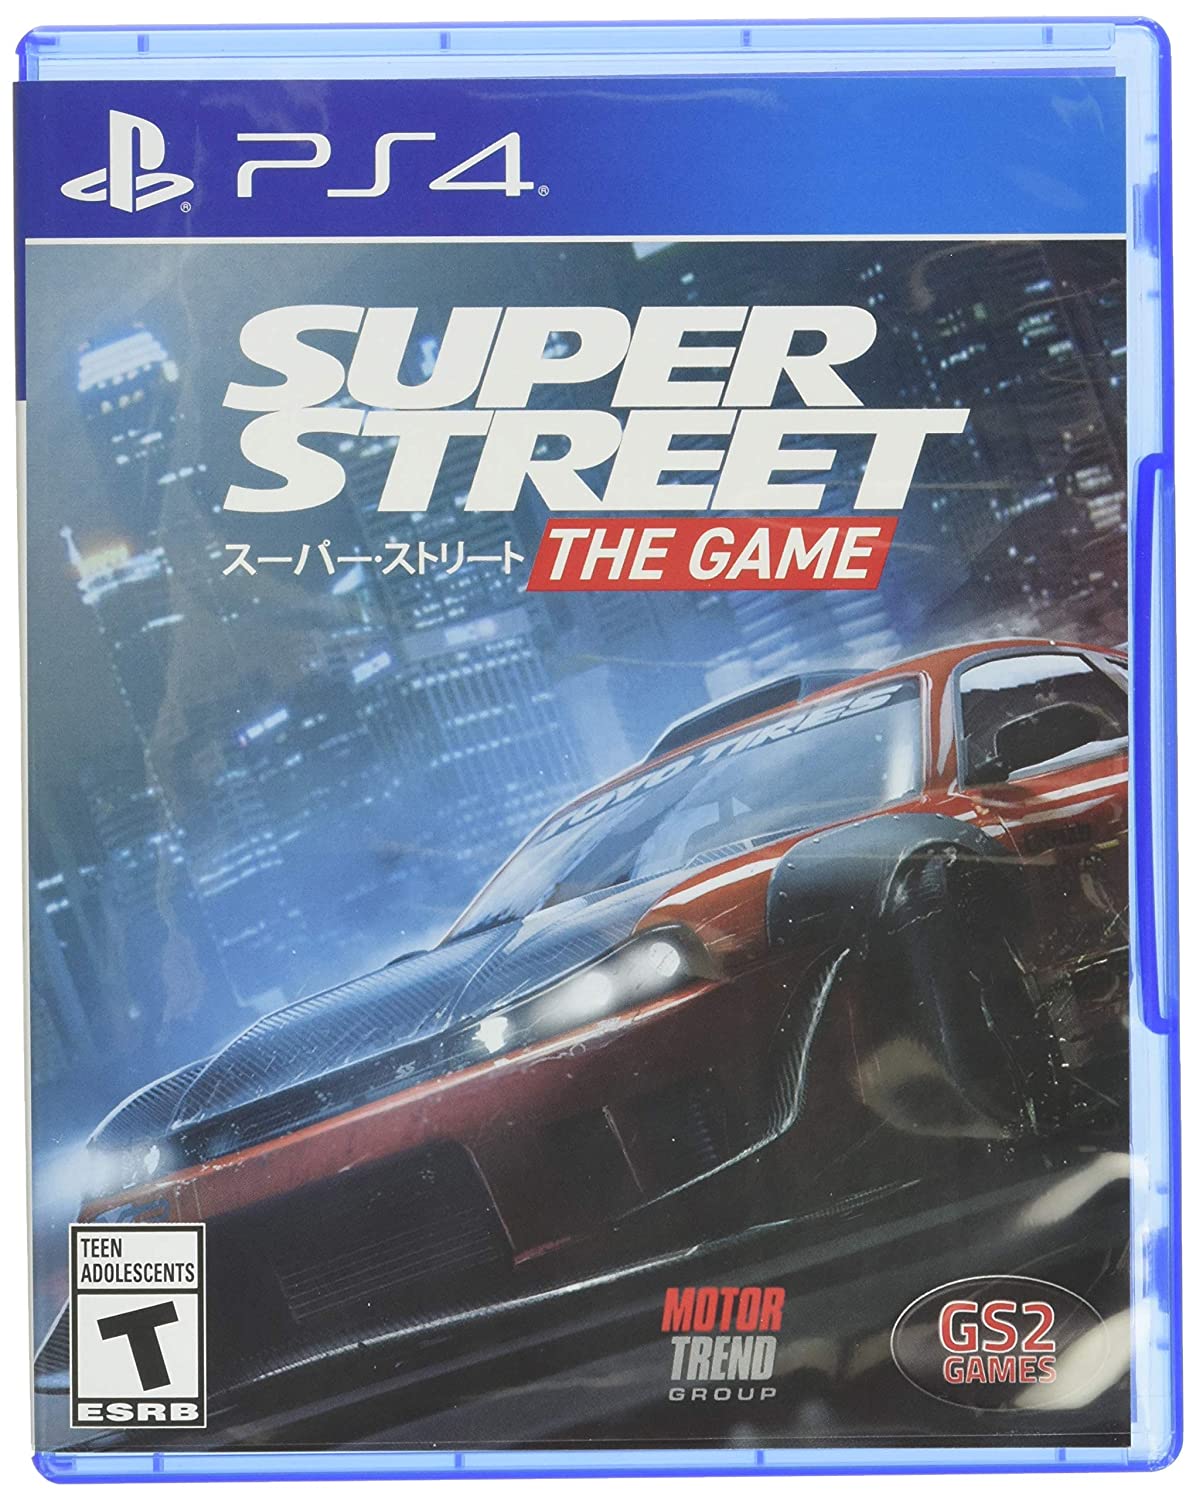 Super STREET: The Game (PC)